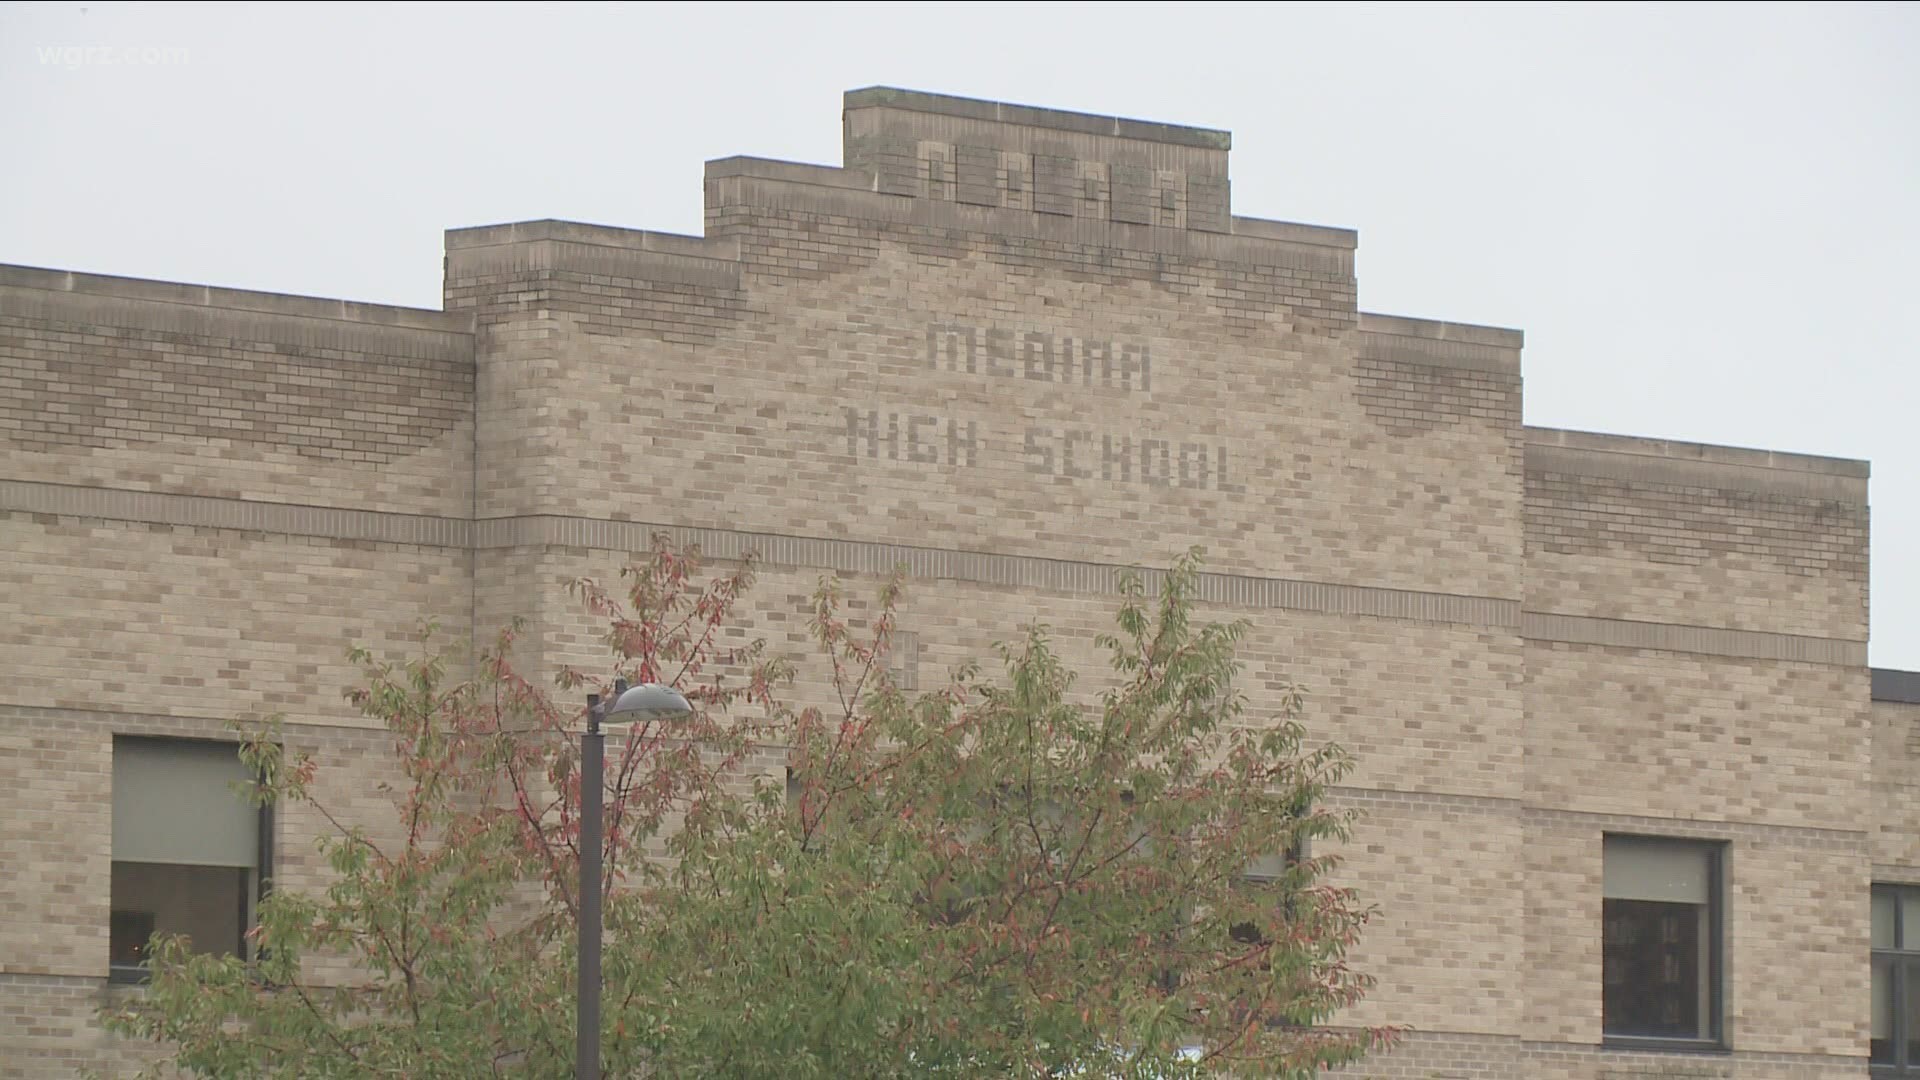 School district officials have been tweaking plans for the return of more students for more days in the classroom. But Channel 2 found out it is more complicated.